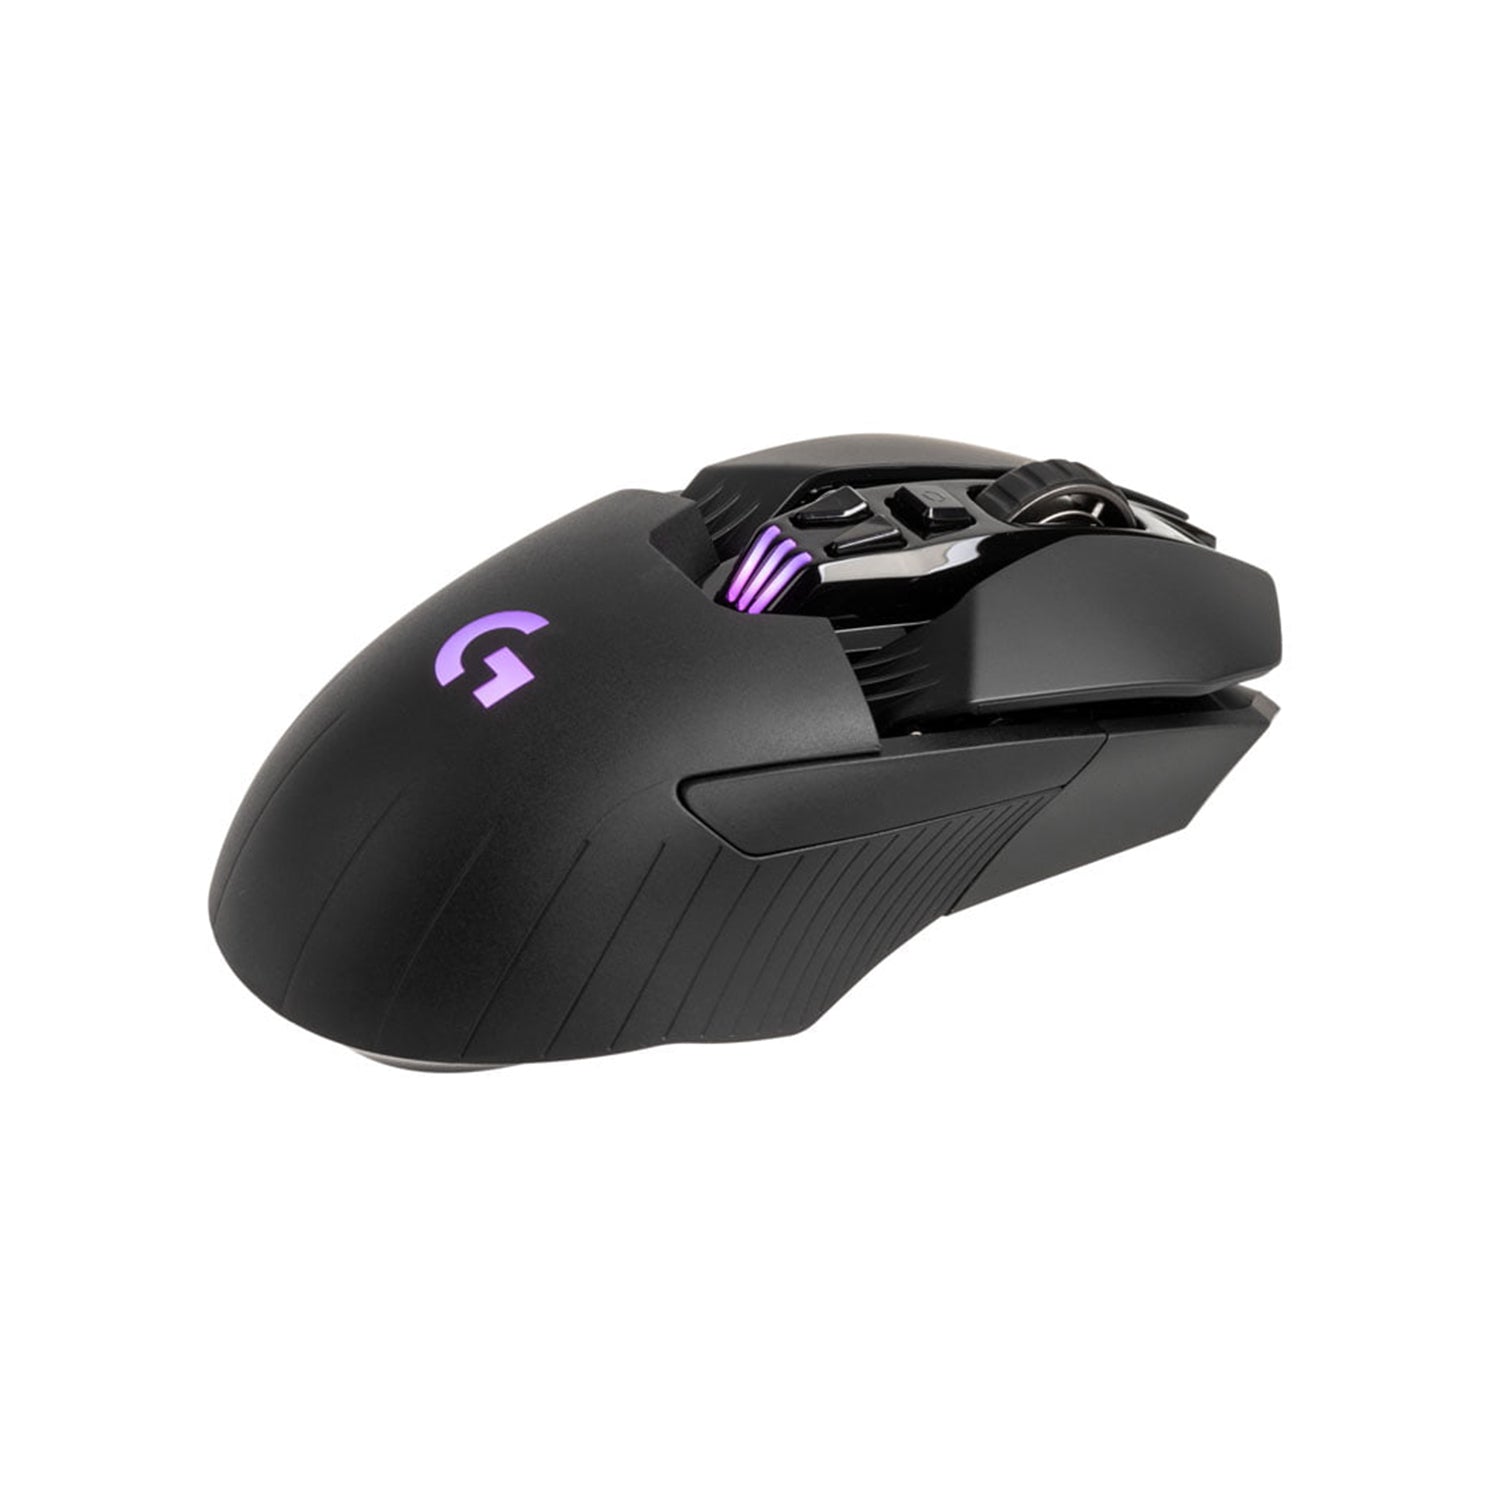 Logitech G903 Gaming Mouse